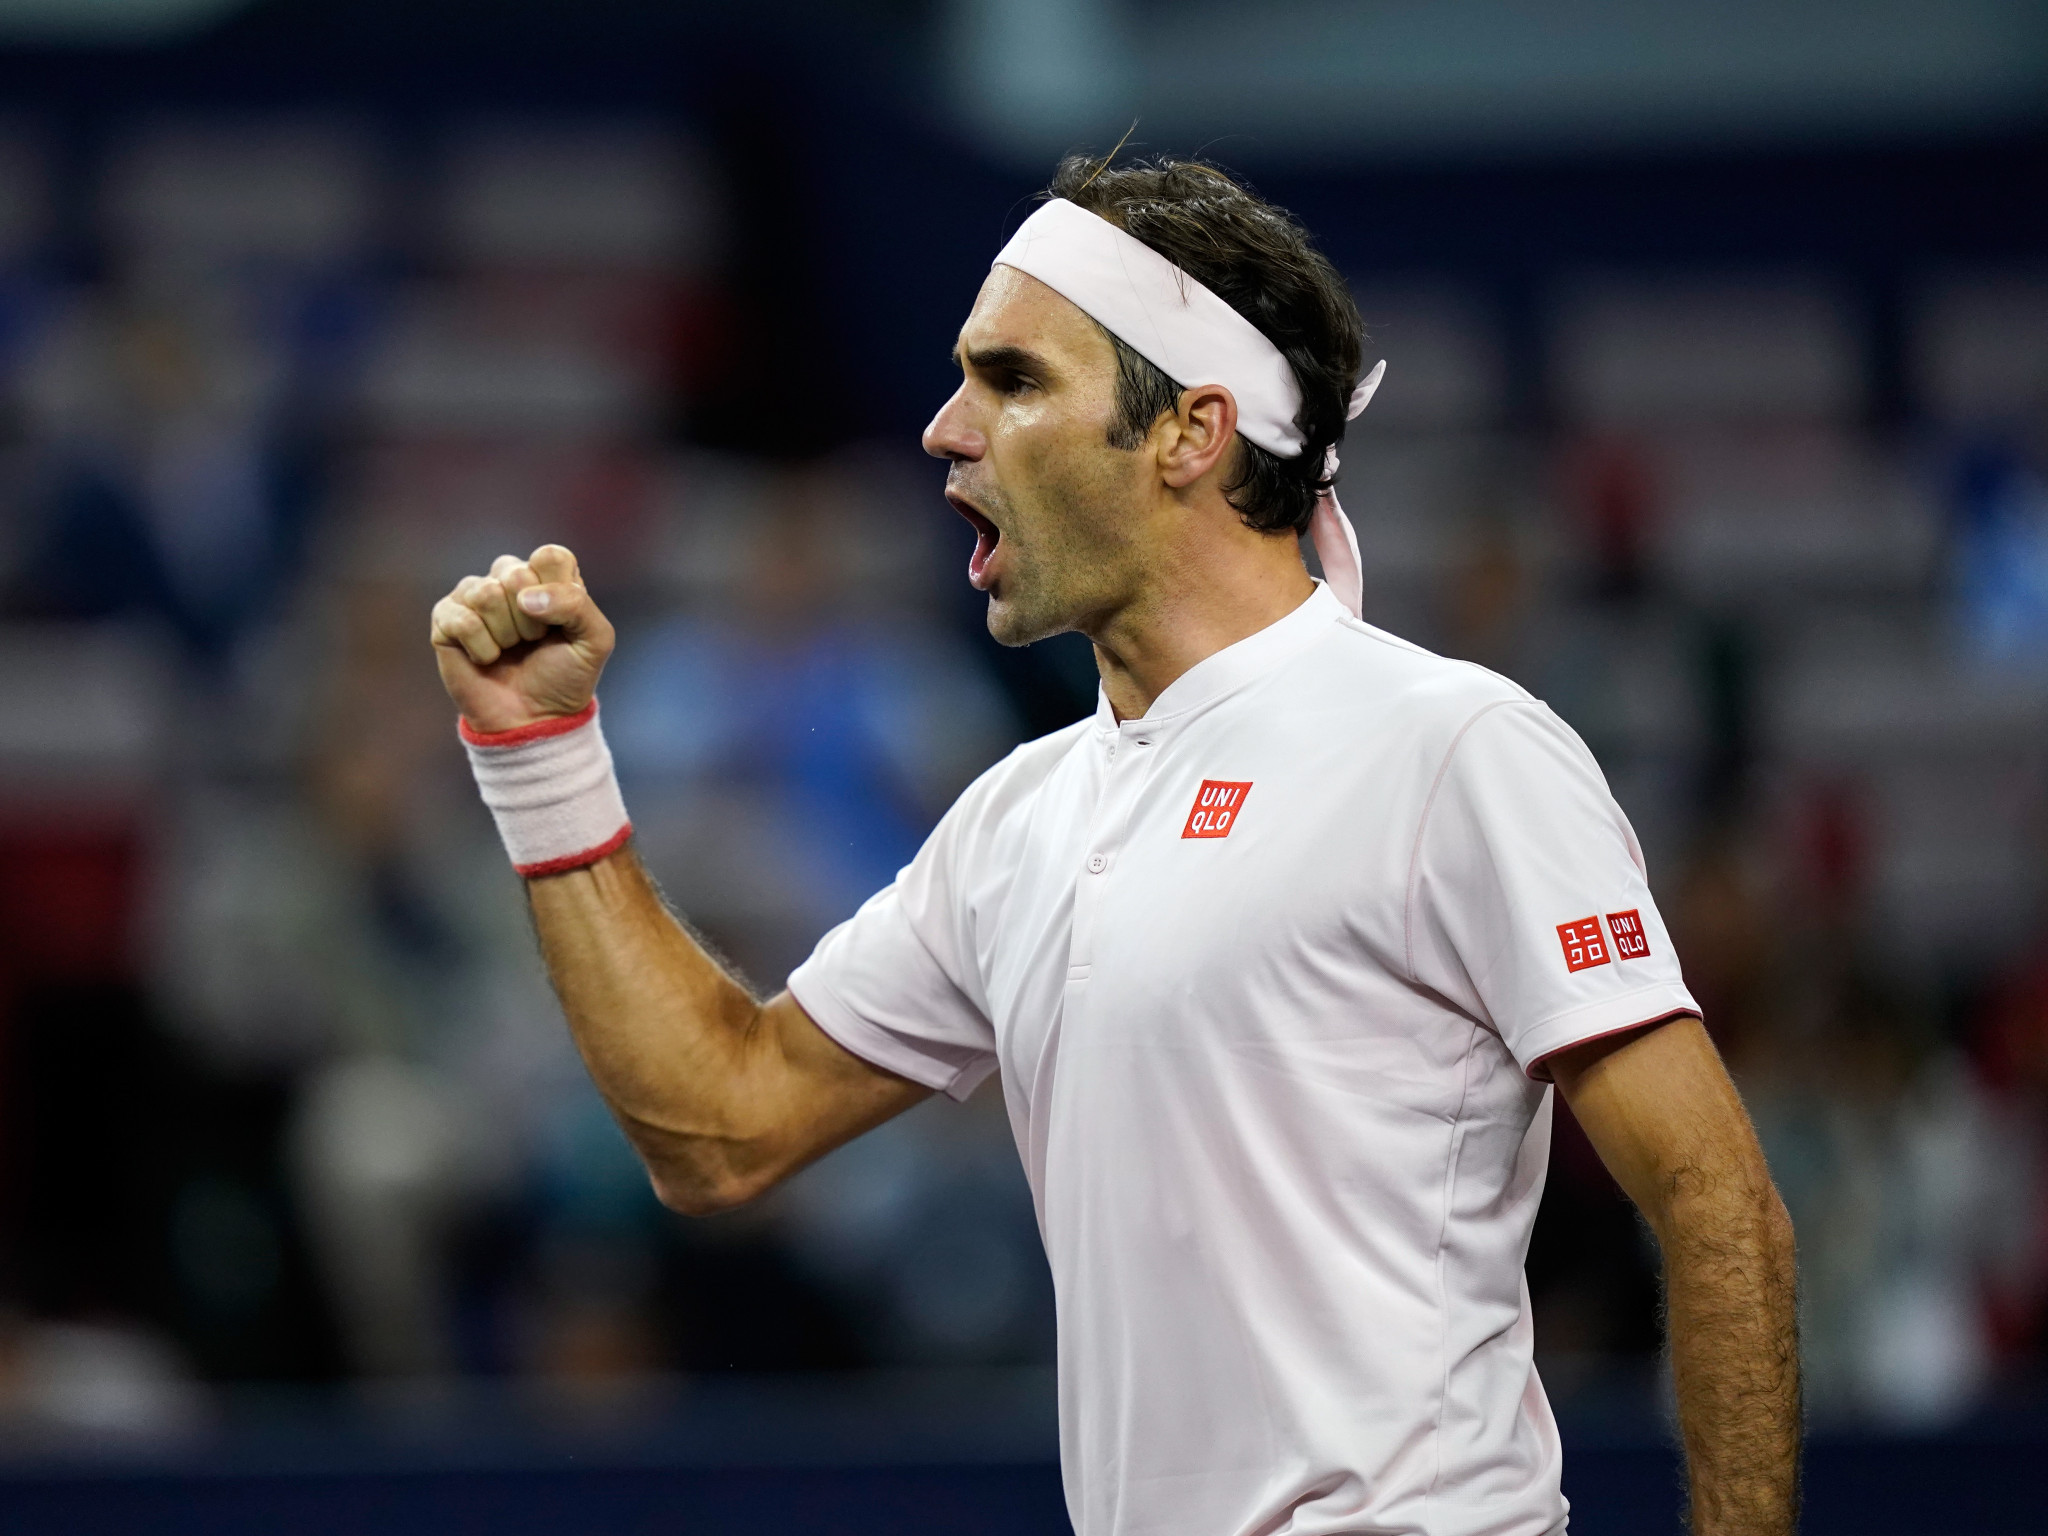 Roger Federer of Switzerland celebrates beating Russia's Daniil Medvedev at the Shanghai Masters, held at the Qizhong Forest Sports City Arena in China ©Getty Images 